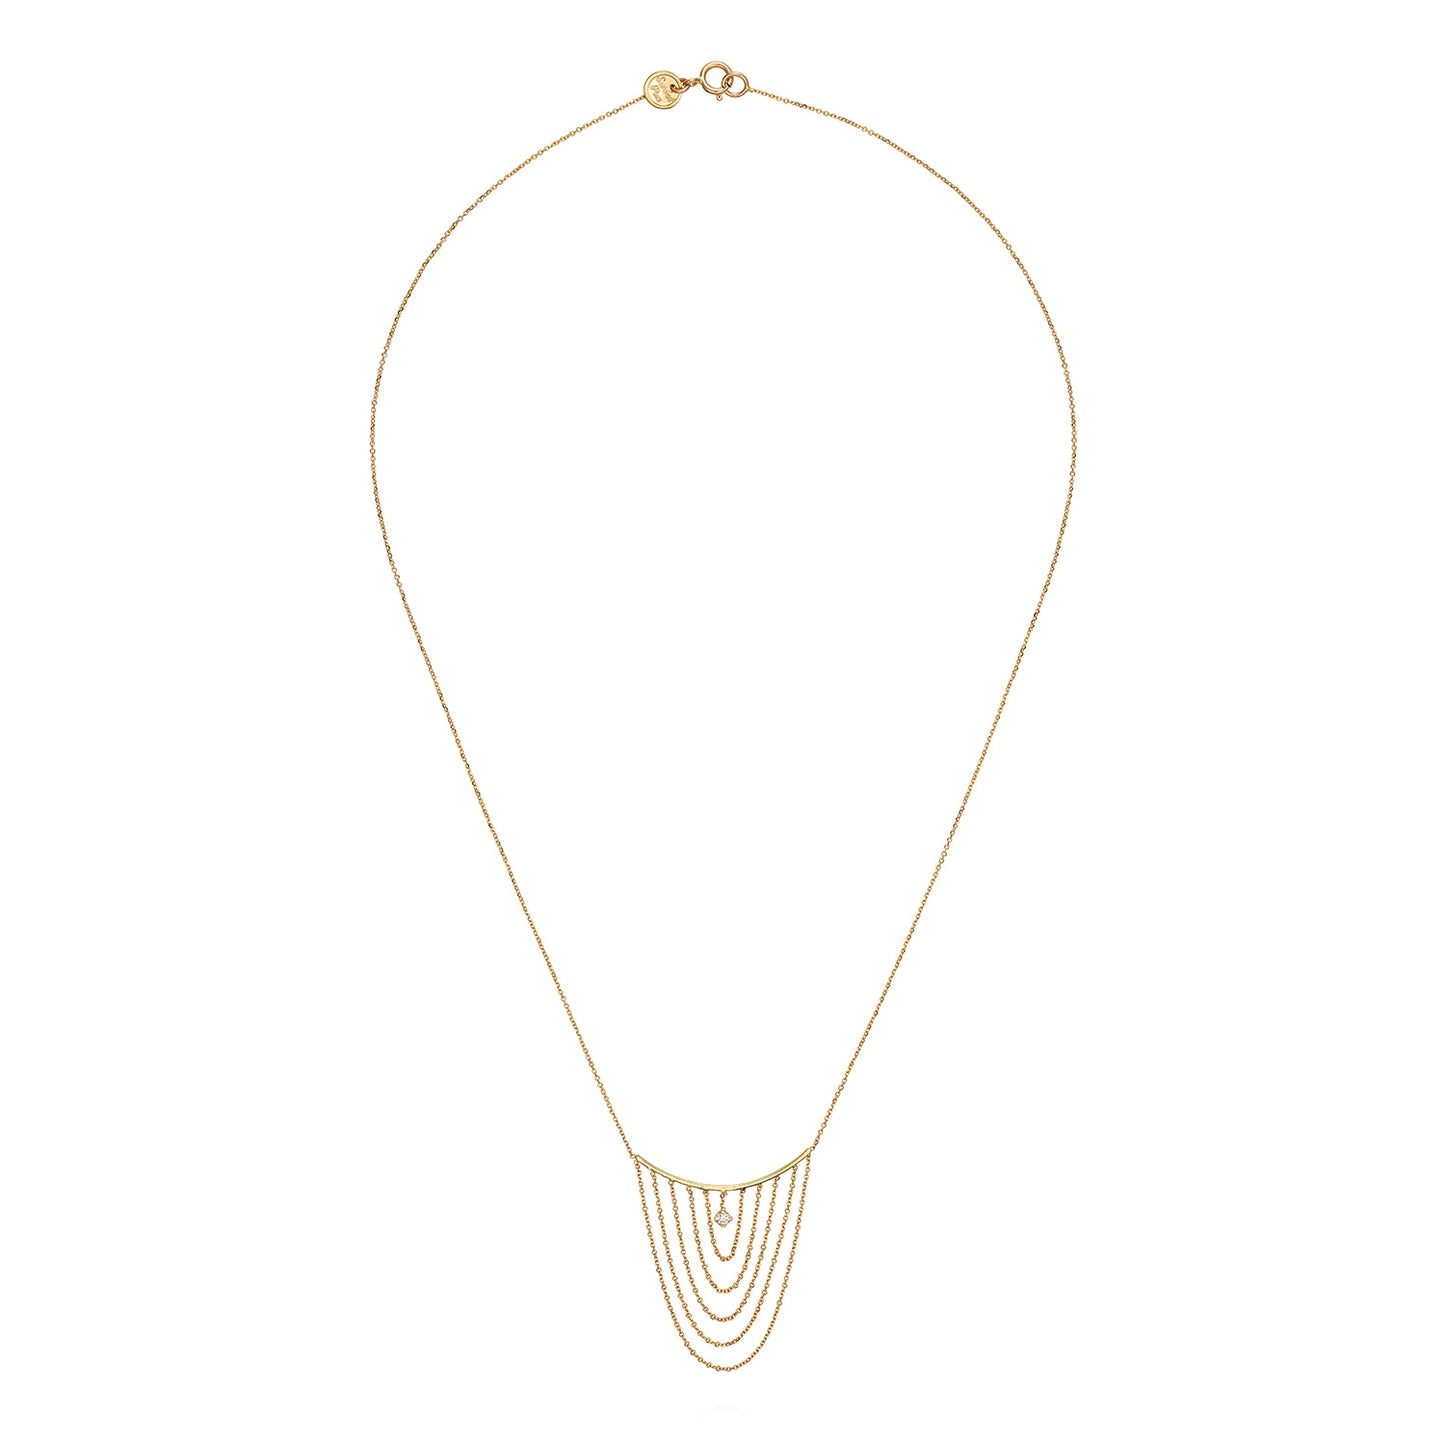 Sweet Pea 18ct yellow gold fine chain Nouveau Now necklace with looped chains and hanging white diamond. 